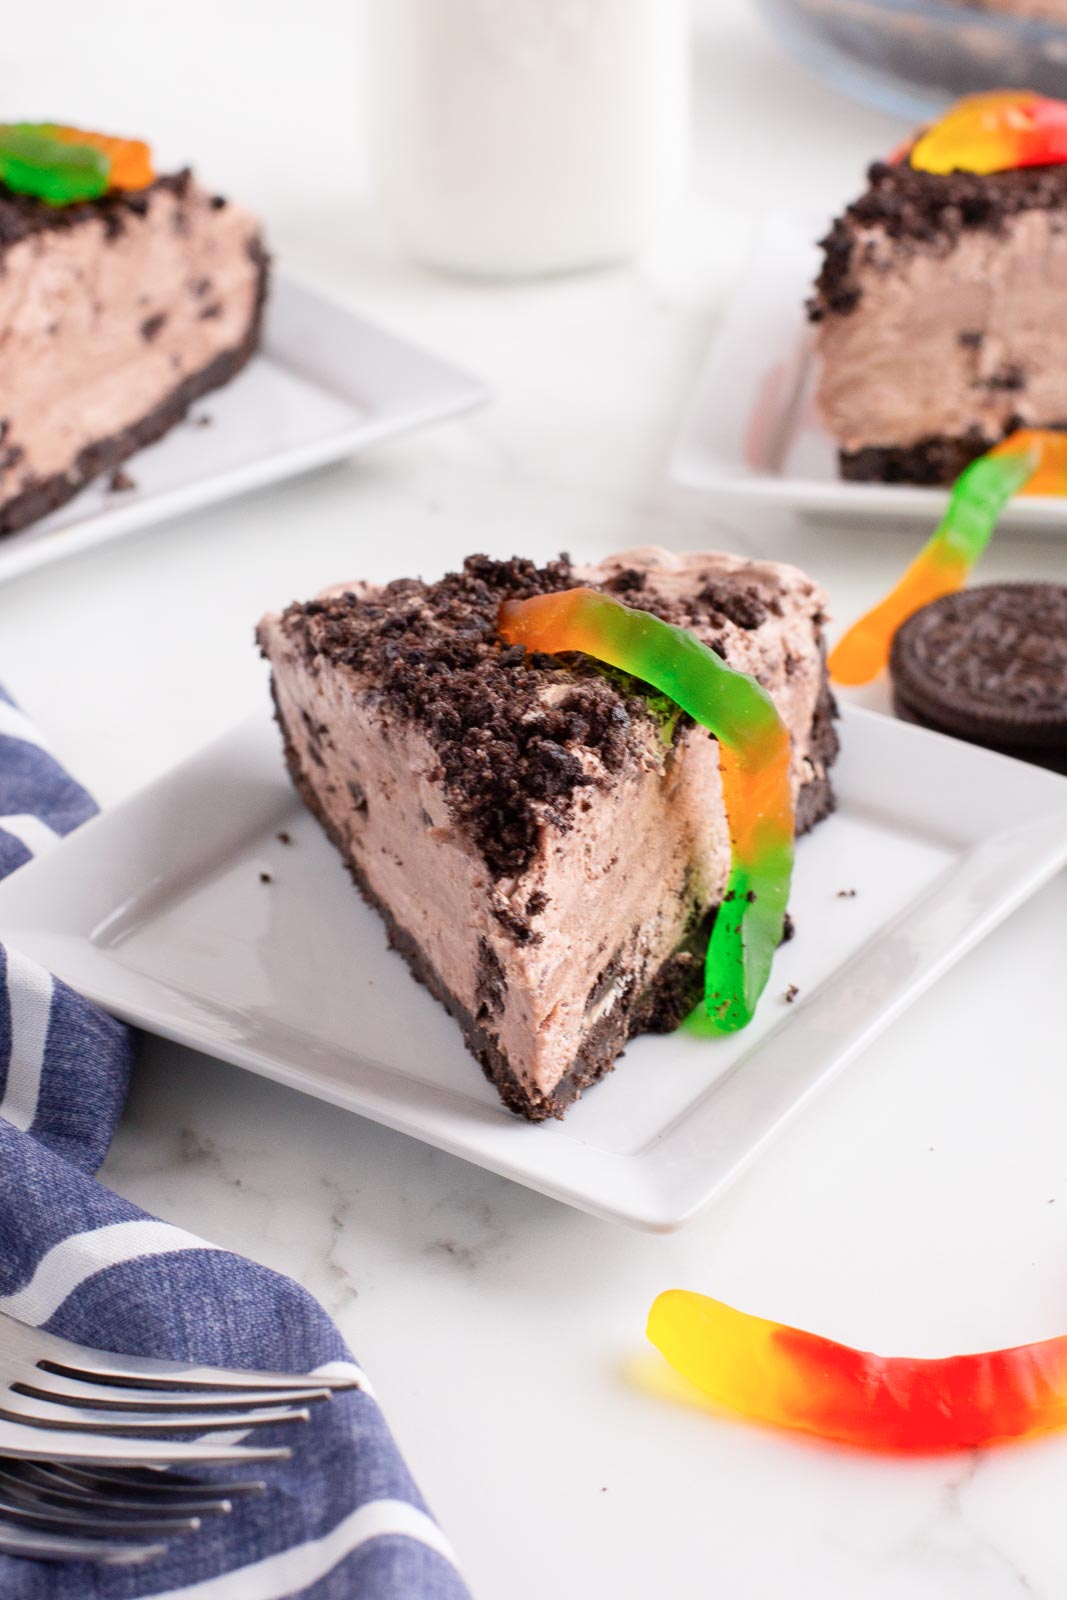 Slices of Oreo dirt pie served on plates and topped with gummy worms.